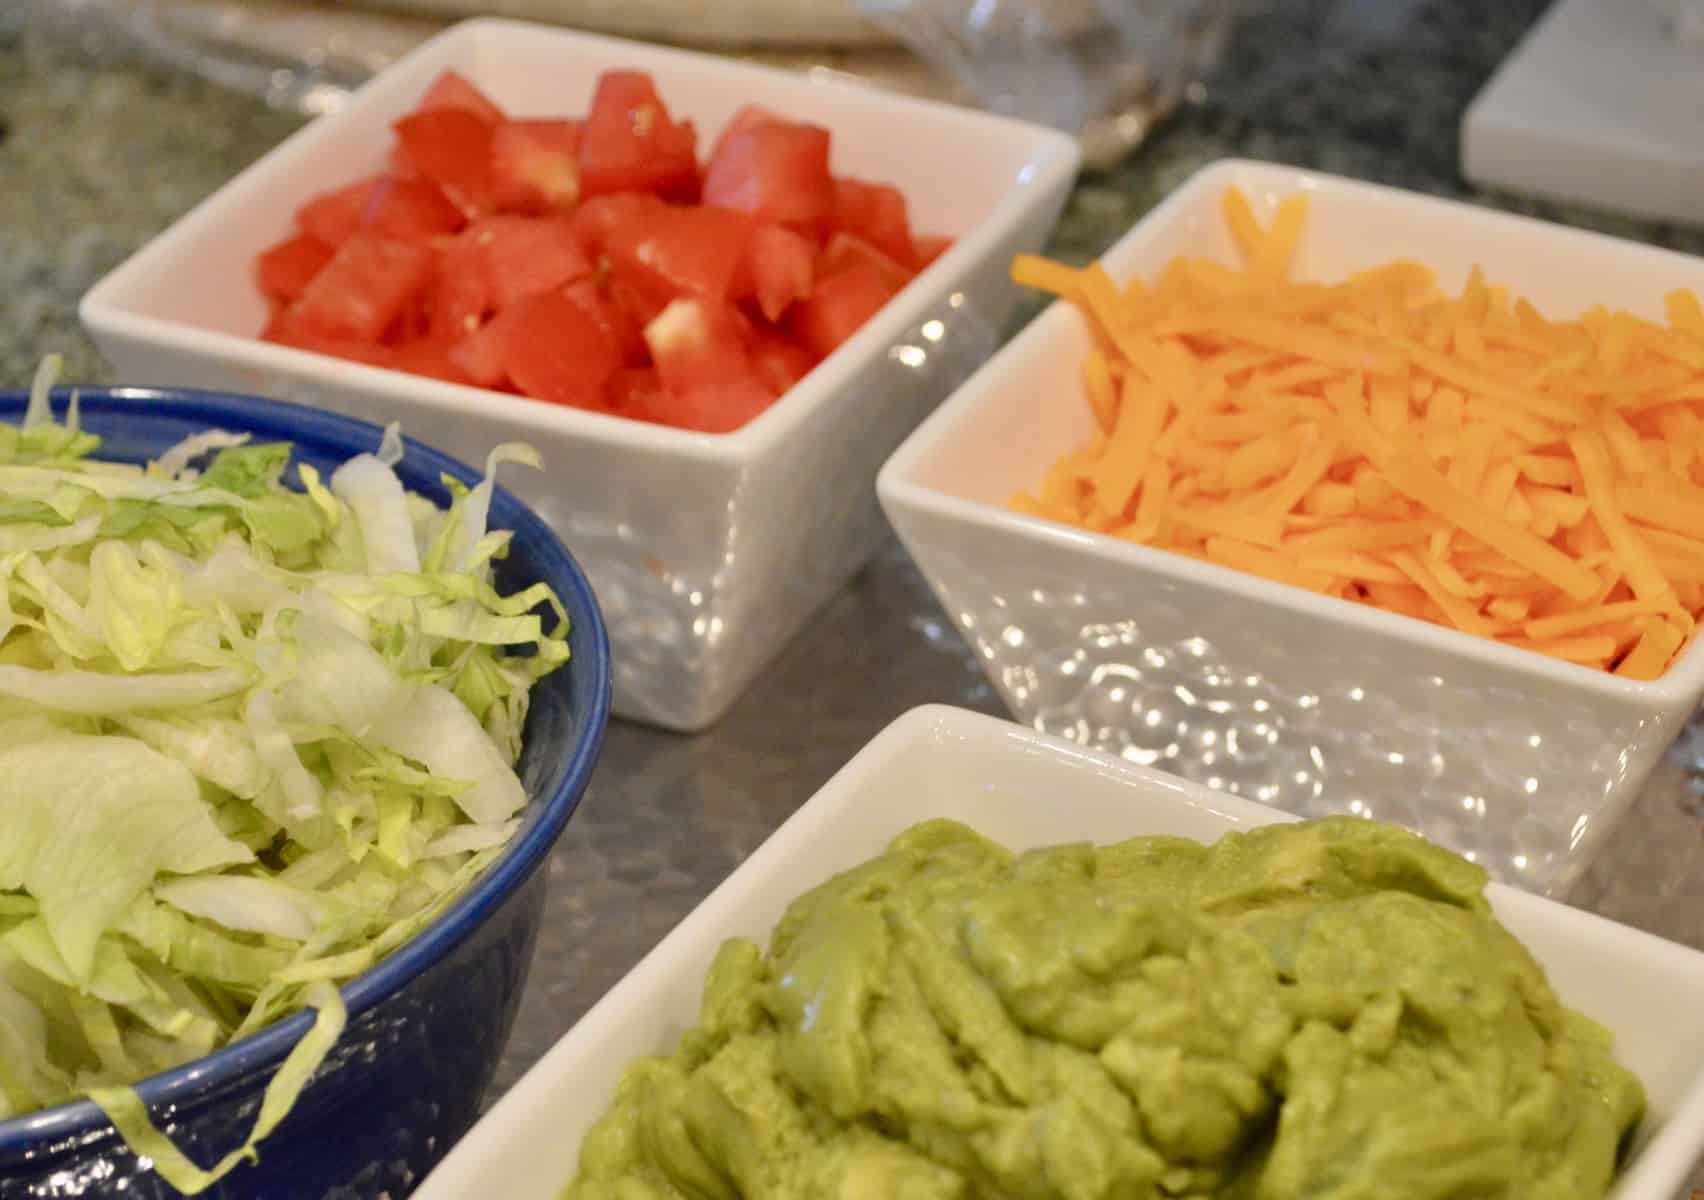 toppings for taco bar include sour cream, guacamole, cheddar and tomatoes 